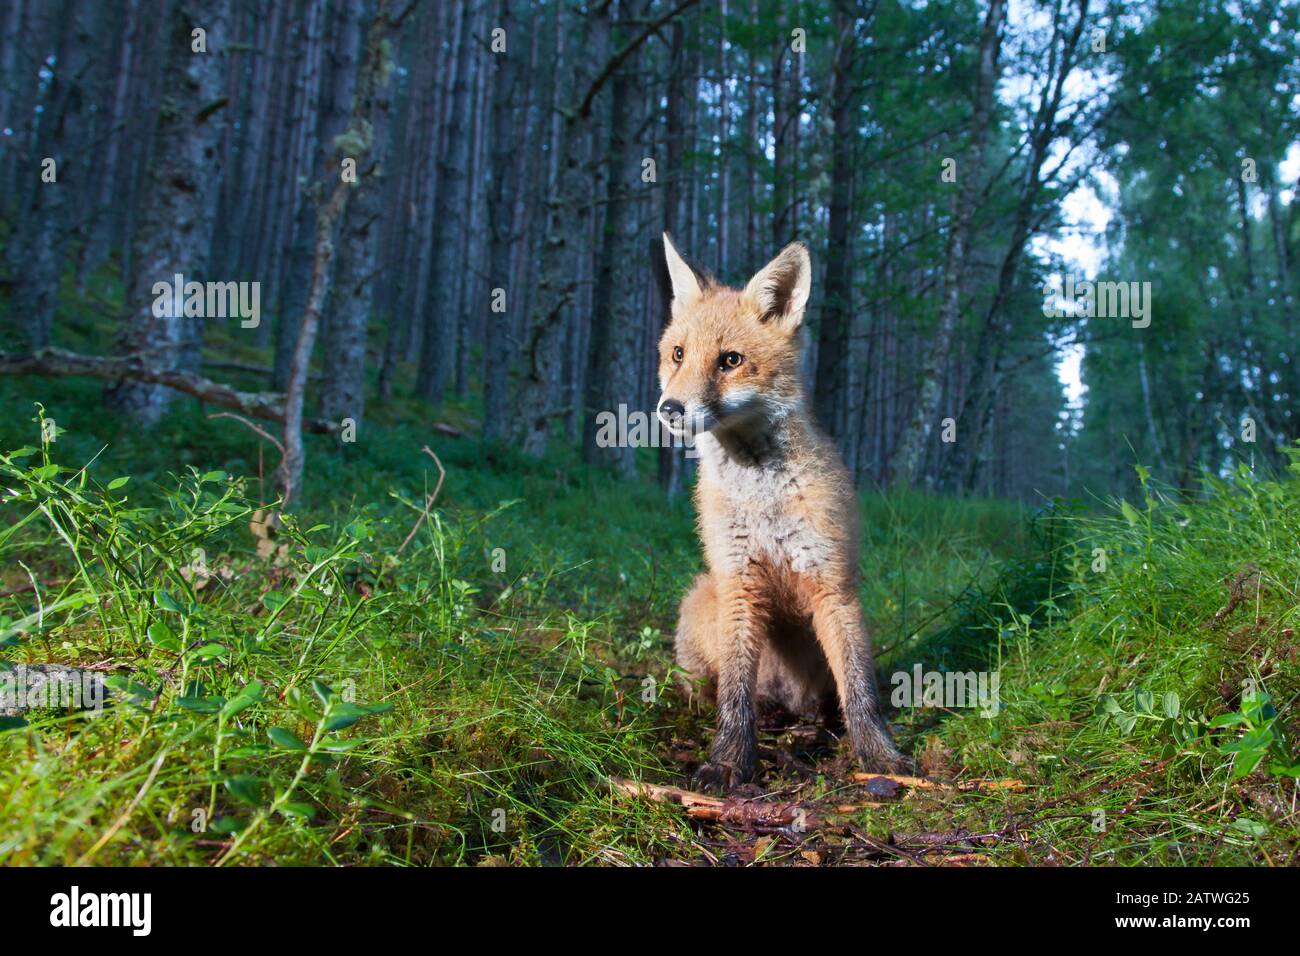 Red fox (Vulpes vulpes) cub sitting in coniferous woodland clearing at dusk. Glenfeshie, Cairngorms National Park, Scotland, UK. Stock Photo